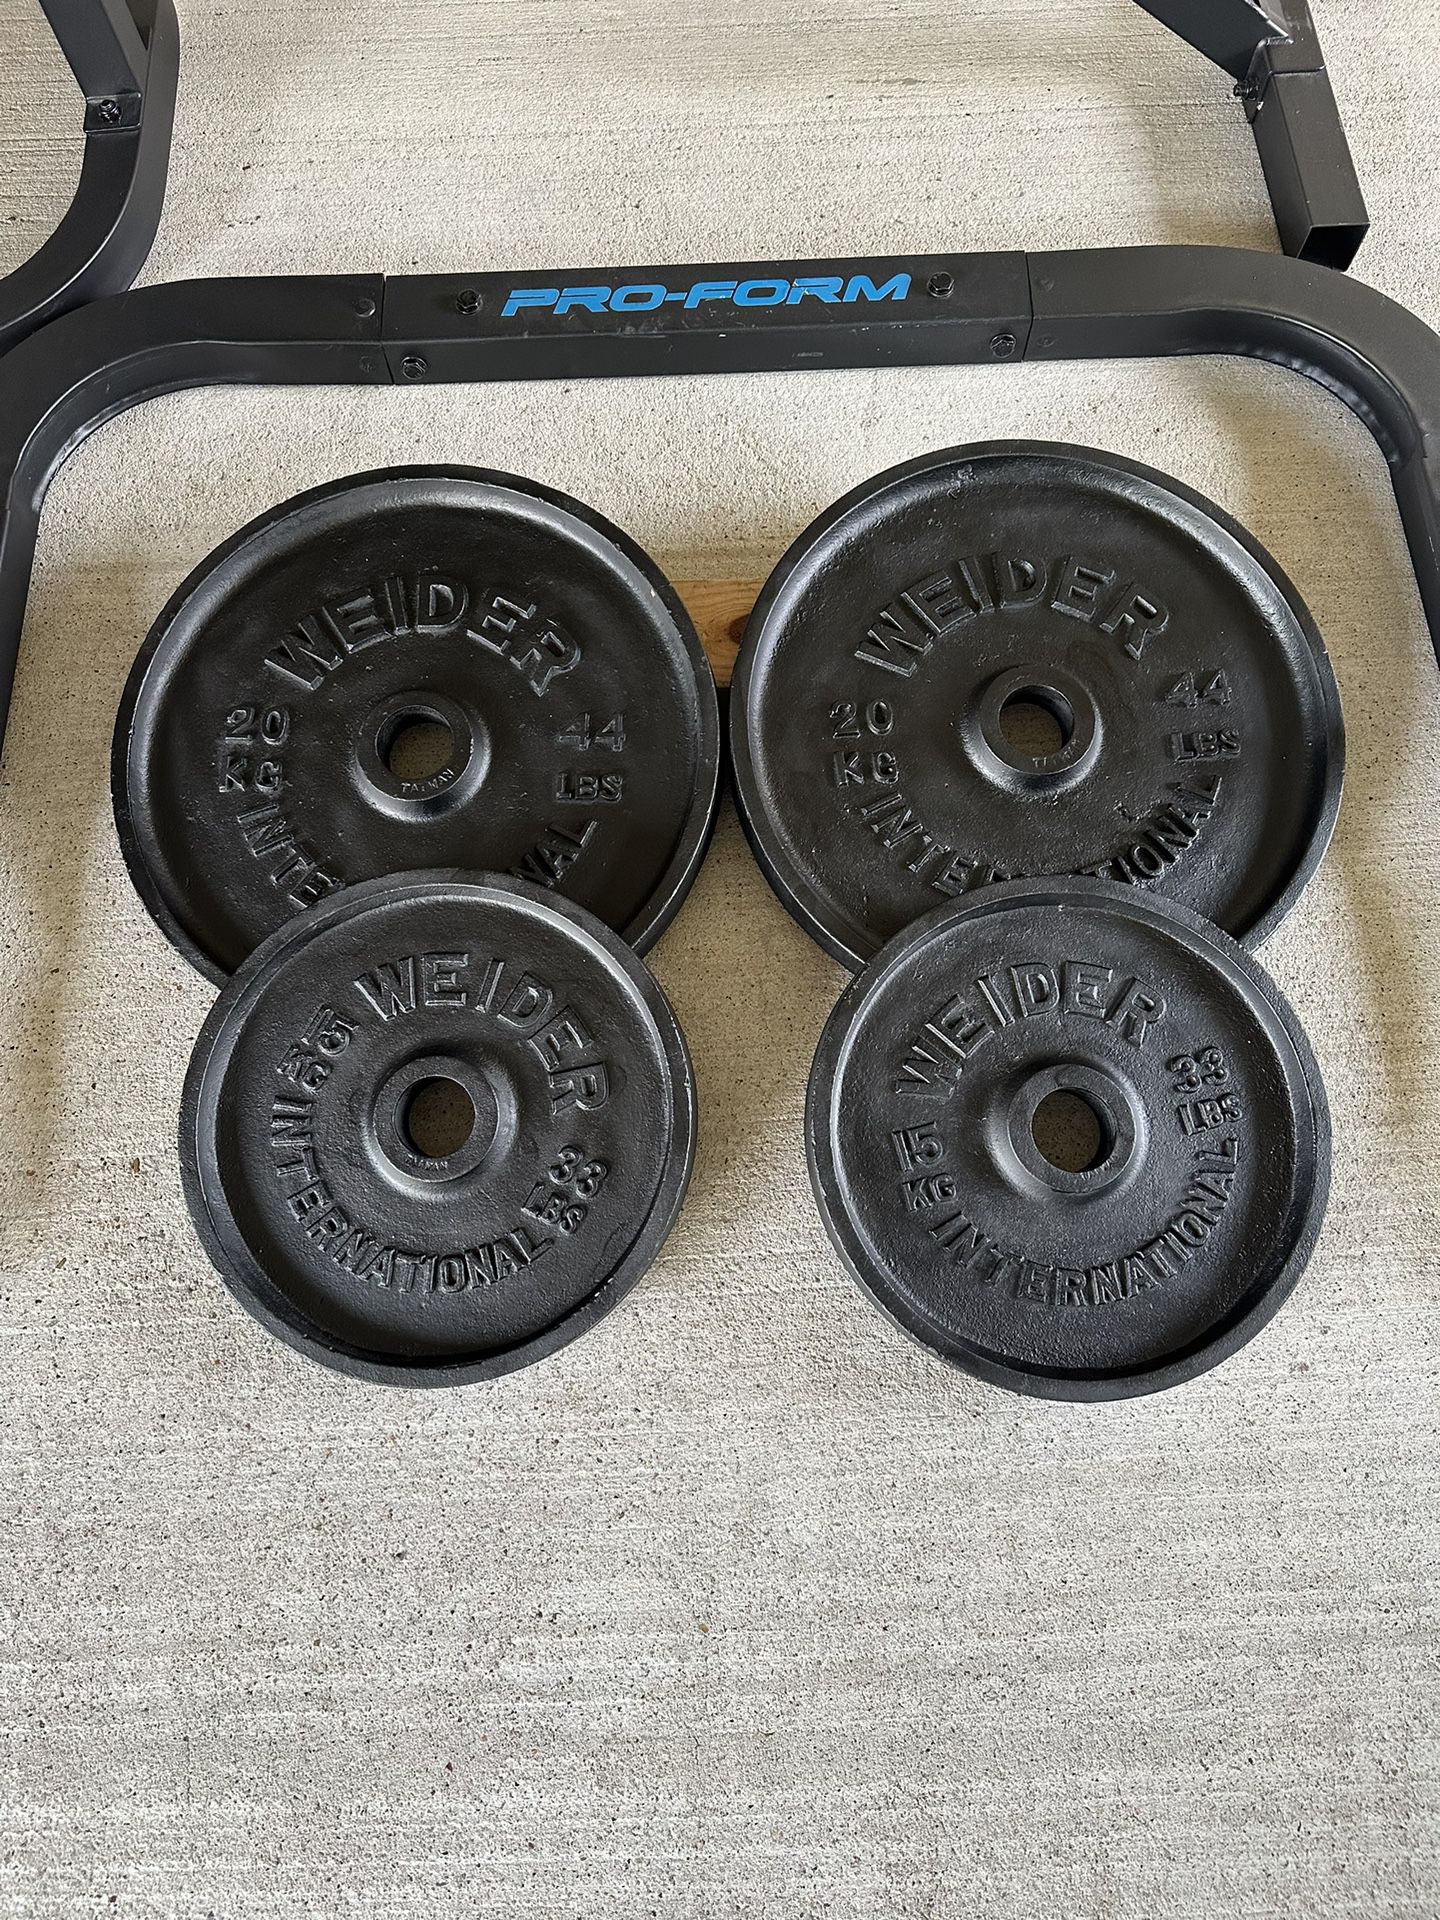 WEIDER 154Lb Olympic Barbell Weight Plates $140  firm price    